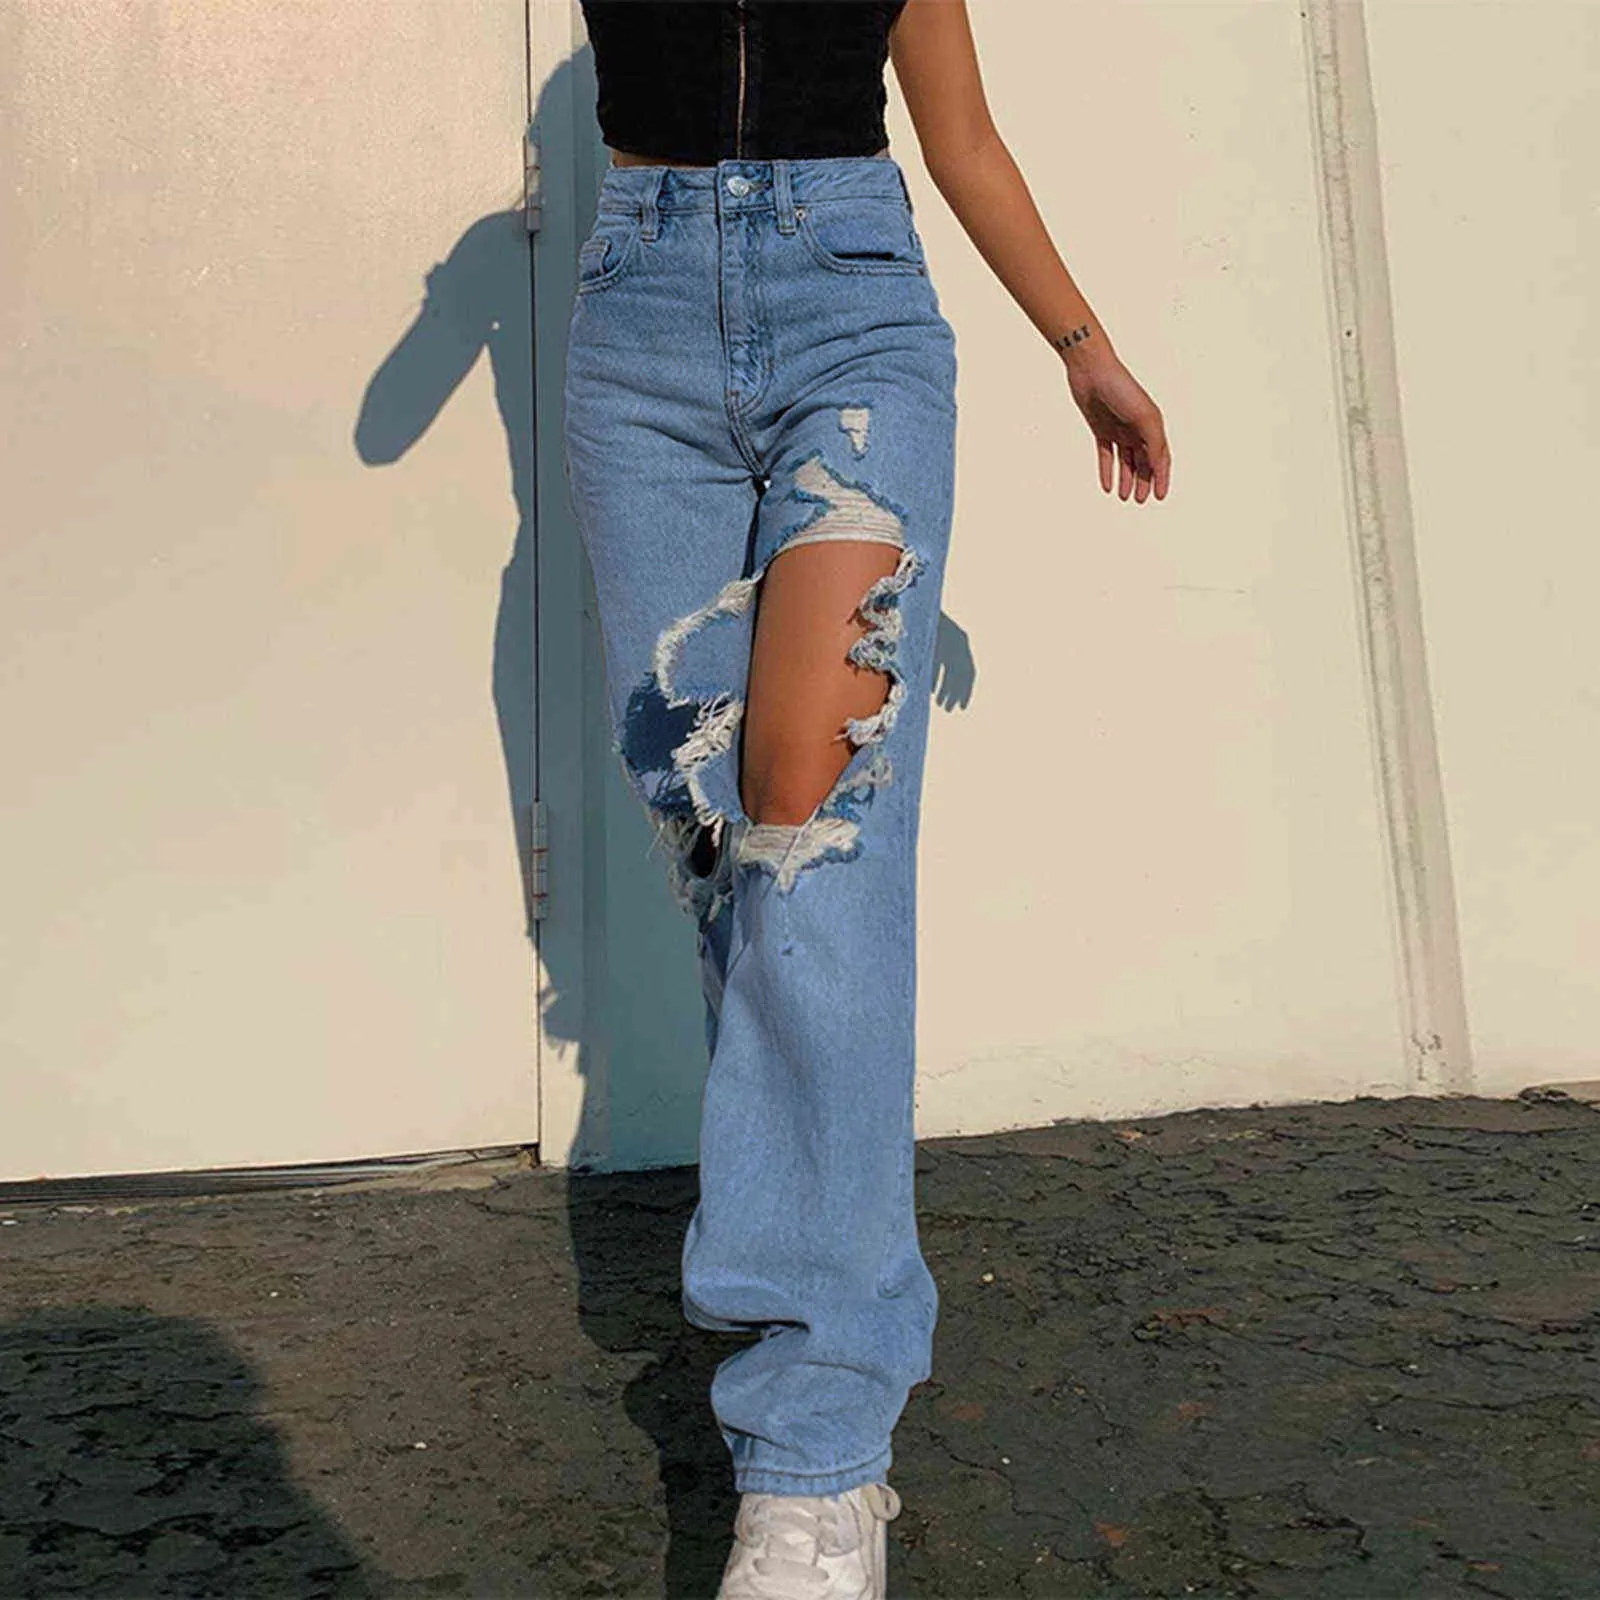 Summer Women's High Waist Elastic Ripped Hole Denim Jeans Trousers Wide Leg Ripped Fashion Chic Pant 211115